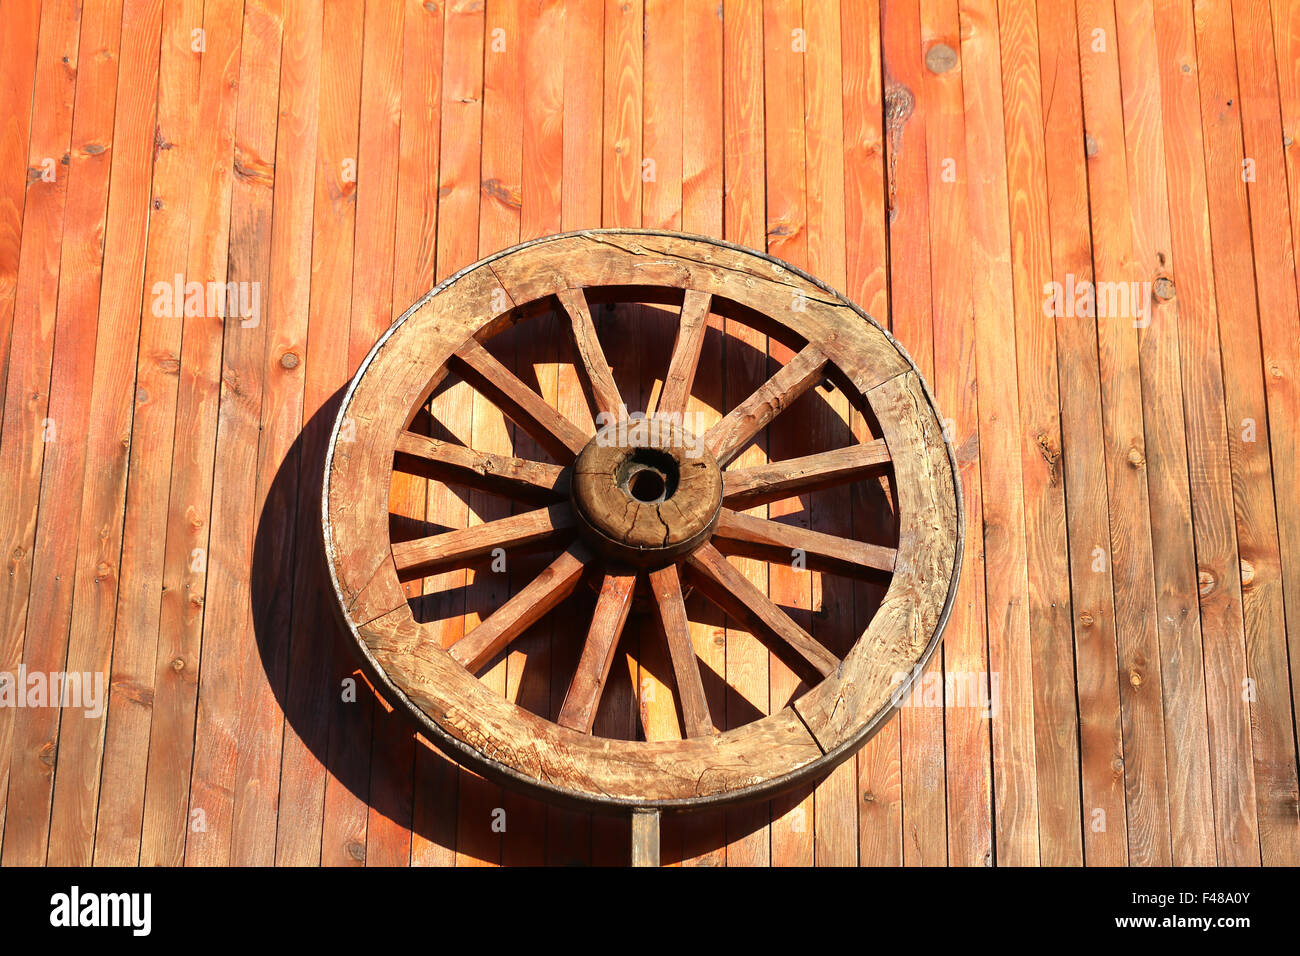 Wooden wheel hanging on the wall photographed close up Stock Photo